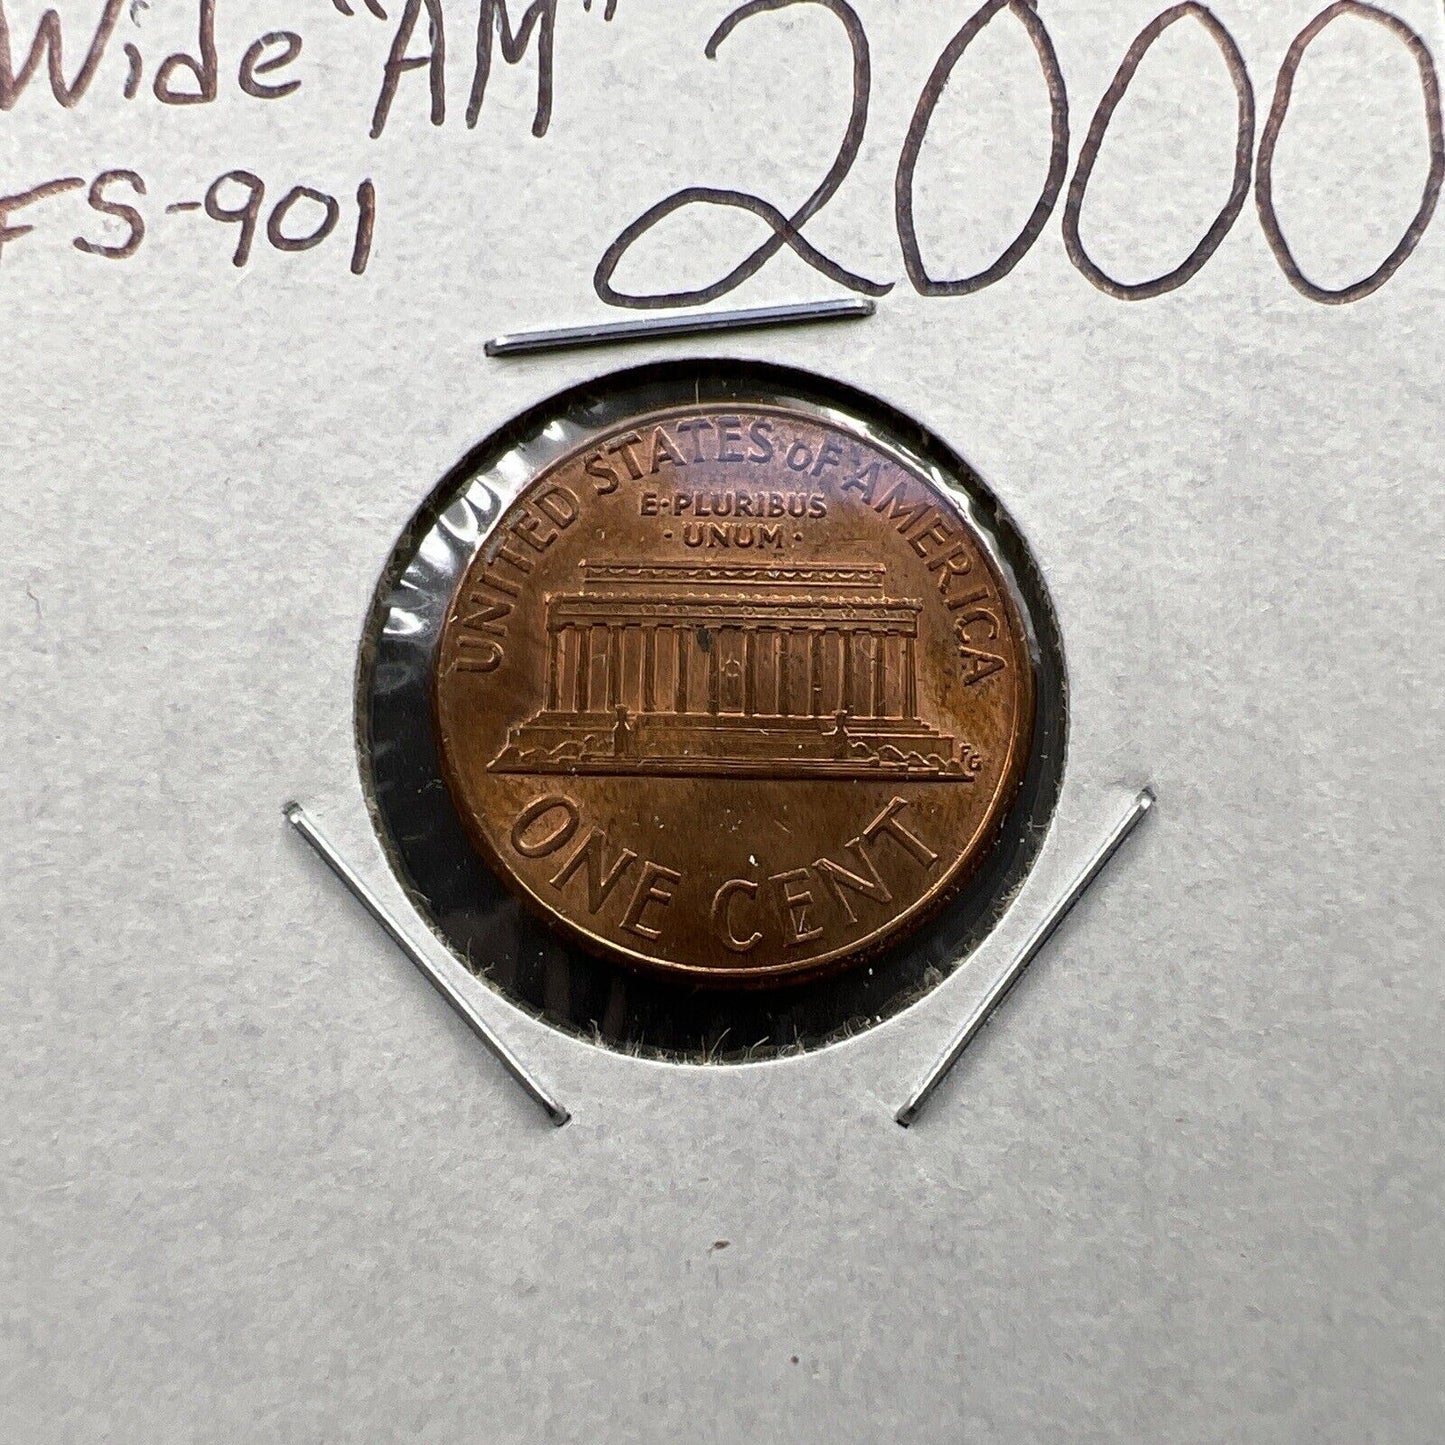 2000 1c Lincoln Memorial One Cent Penny Wide AM Variety CH AU FS-901 #C